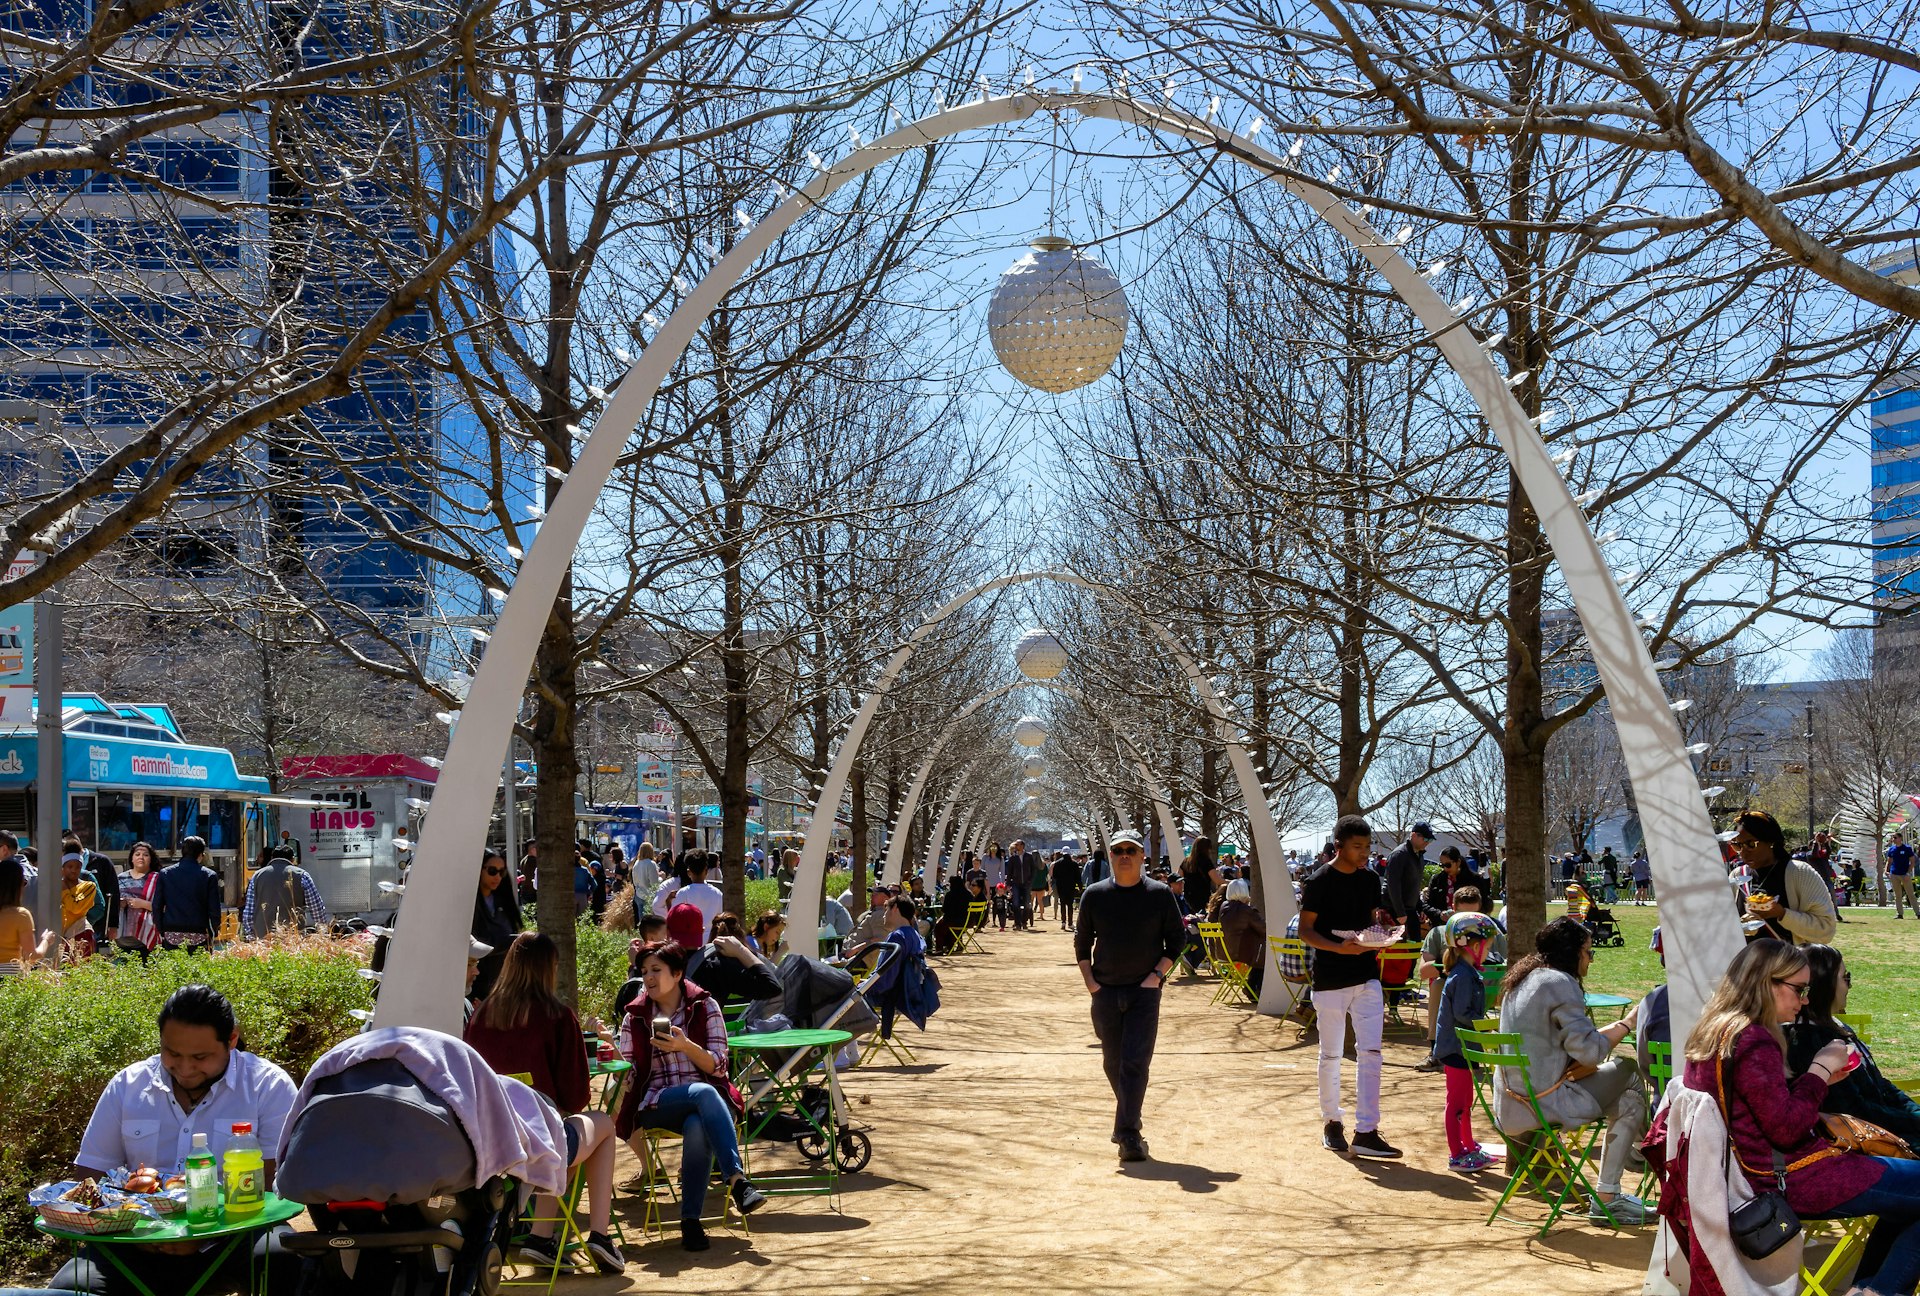 Dallas, Texas - USA - March 16, 2019: Sunny Spring day in Klyde Warren Park in Dallas. People eating in the foodtrucks.